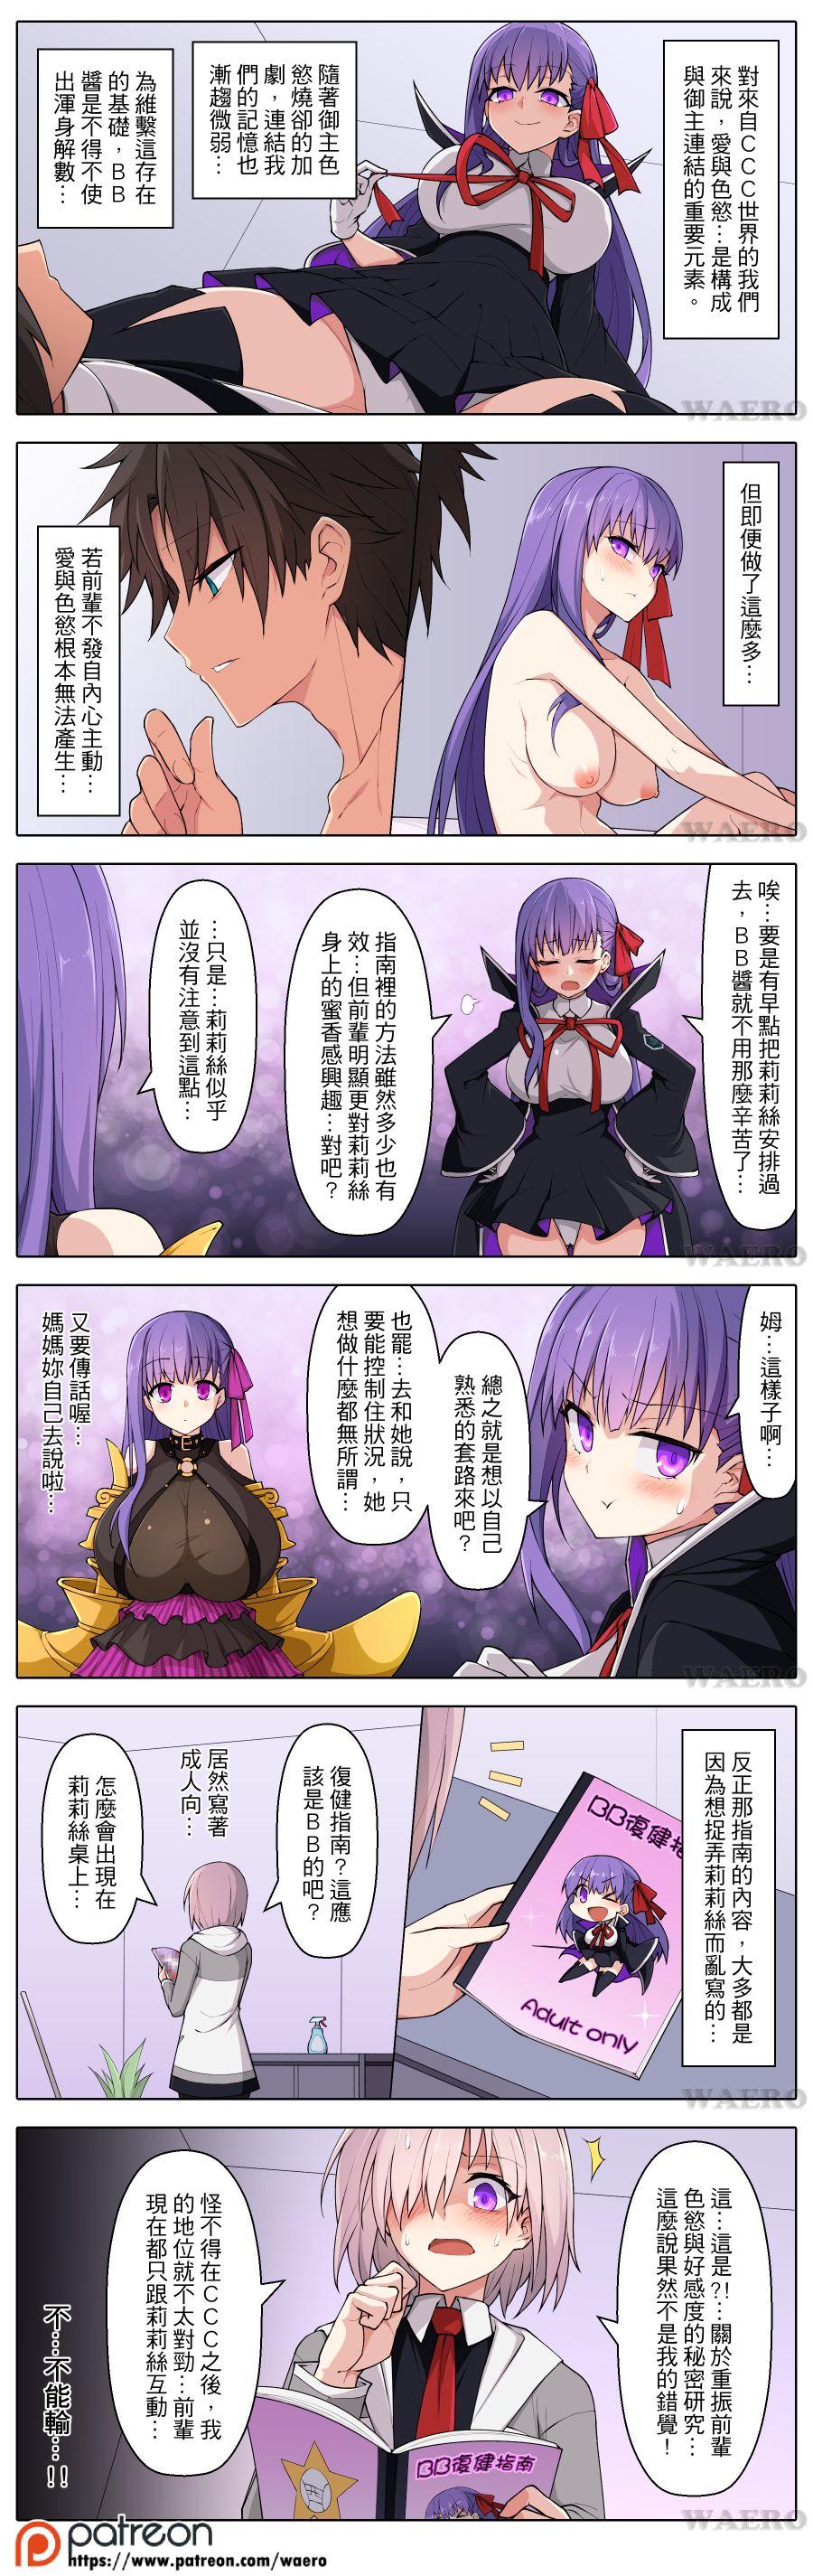 Telugu Lust Grand Order - Fate grand order Belly - Page 4